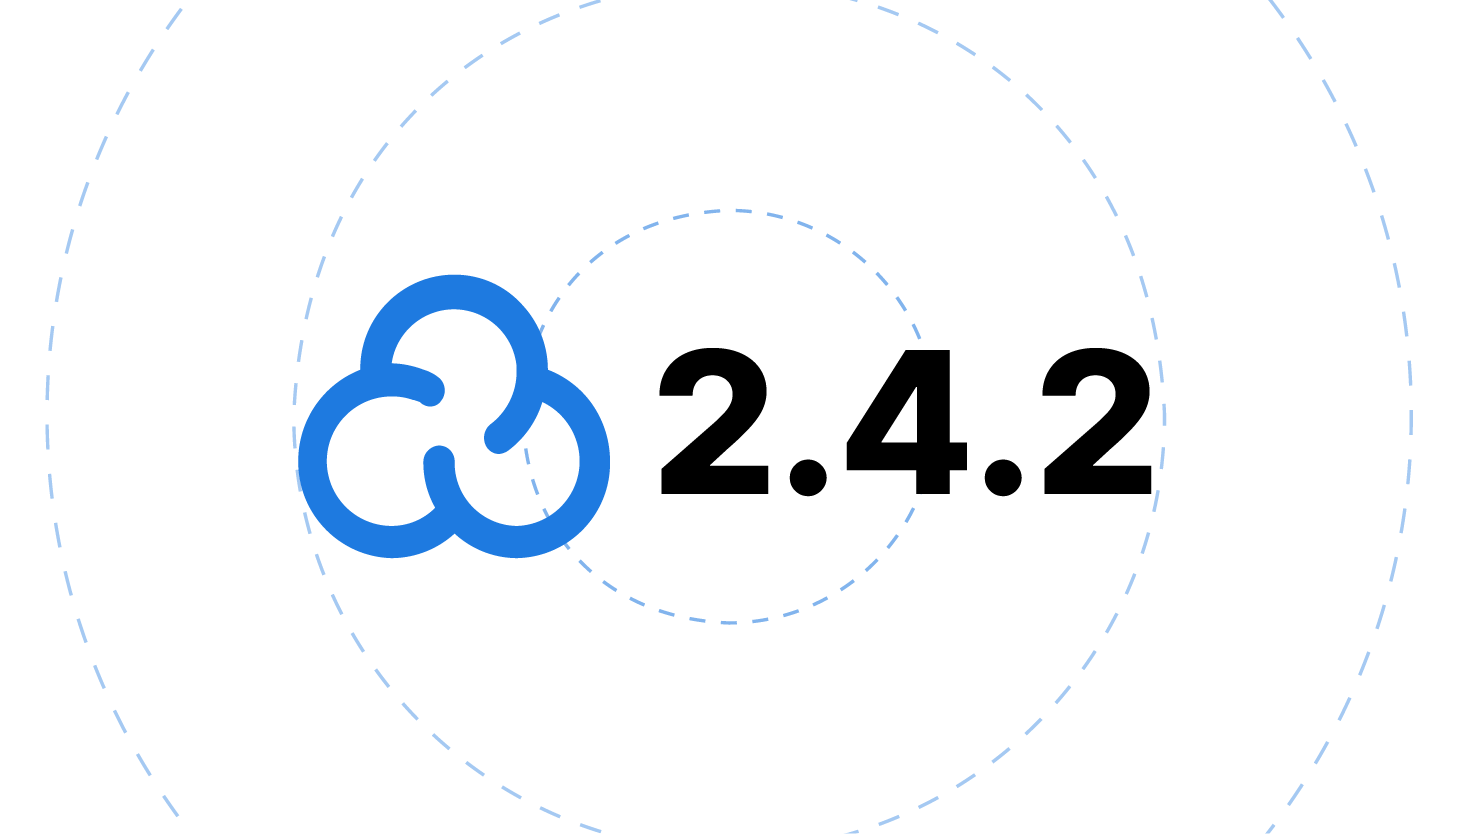 CloudPanel v2.4.2: New Features, Expanded Support, and Bug Fixes